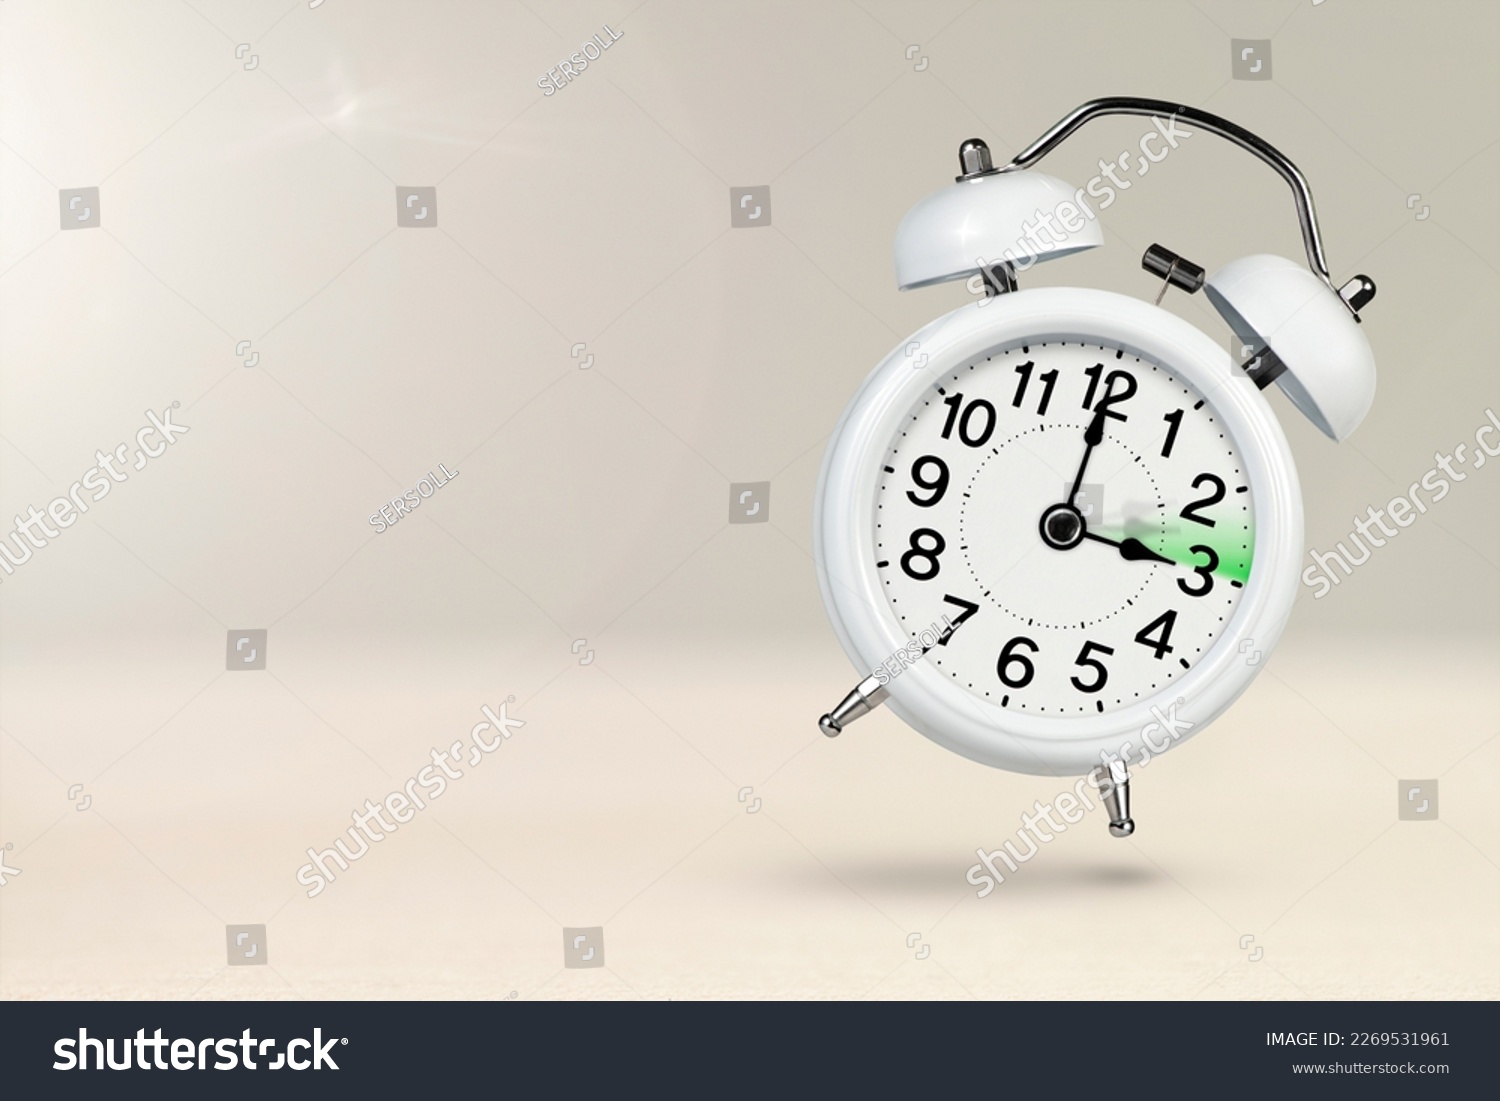 Change time. Summer time concept, on a wooden background. A white alarm clock with a minute hand indicates that the time has been moved forward an hour with copy space. #2269531961